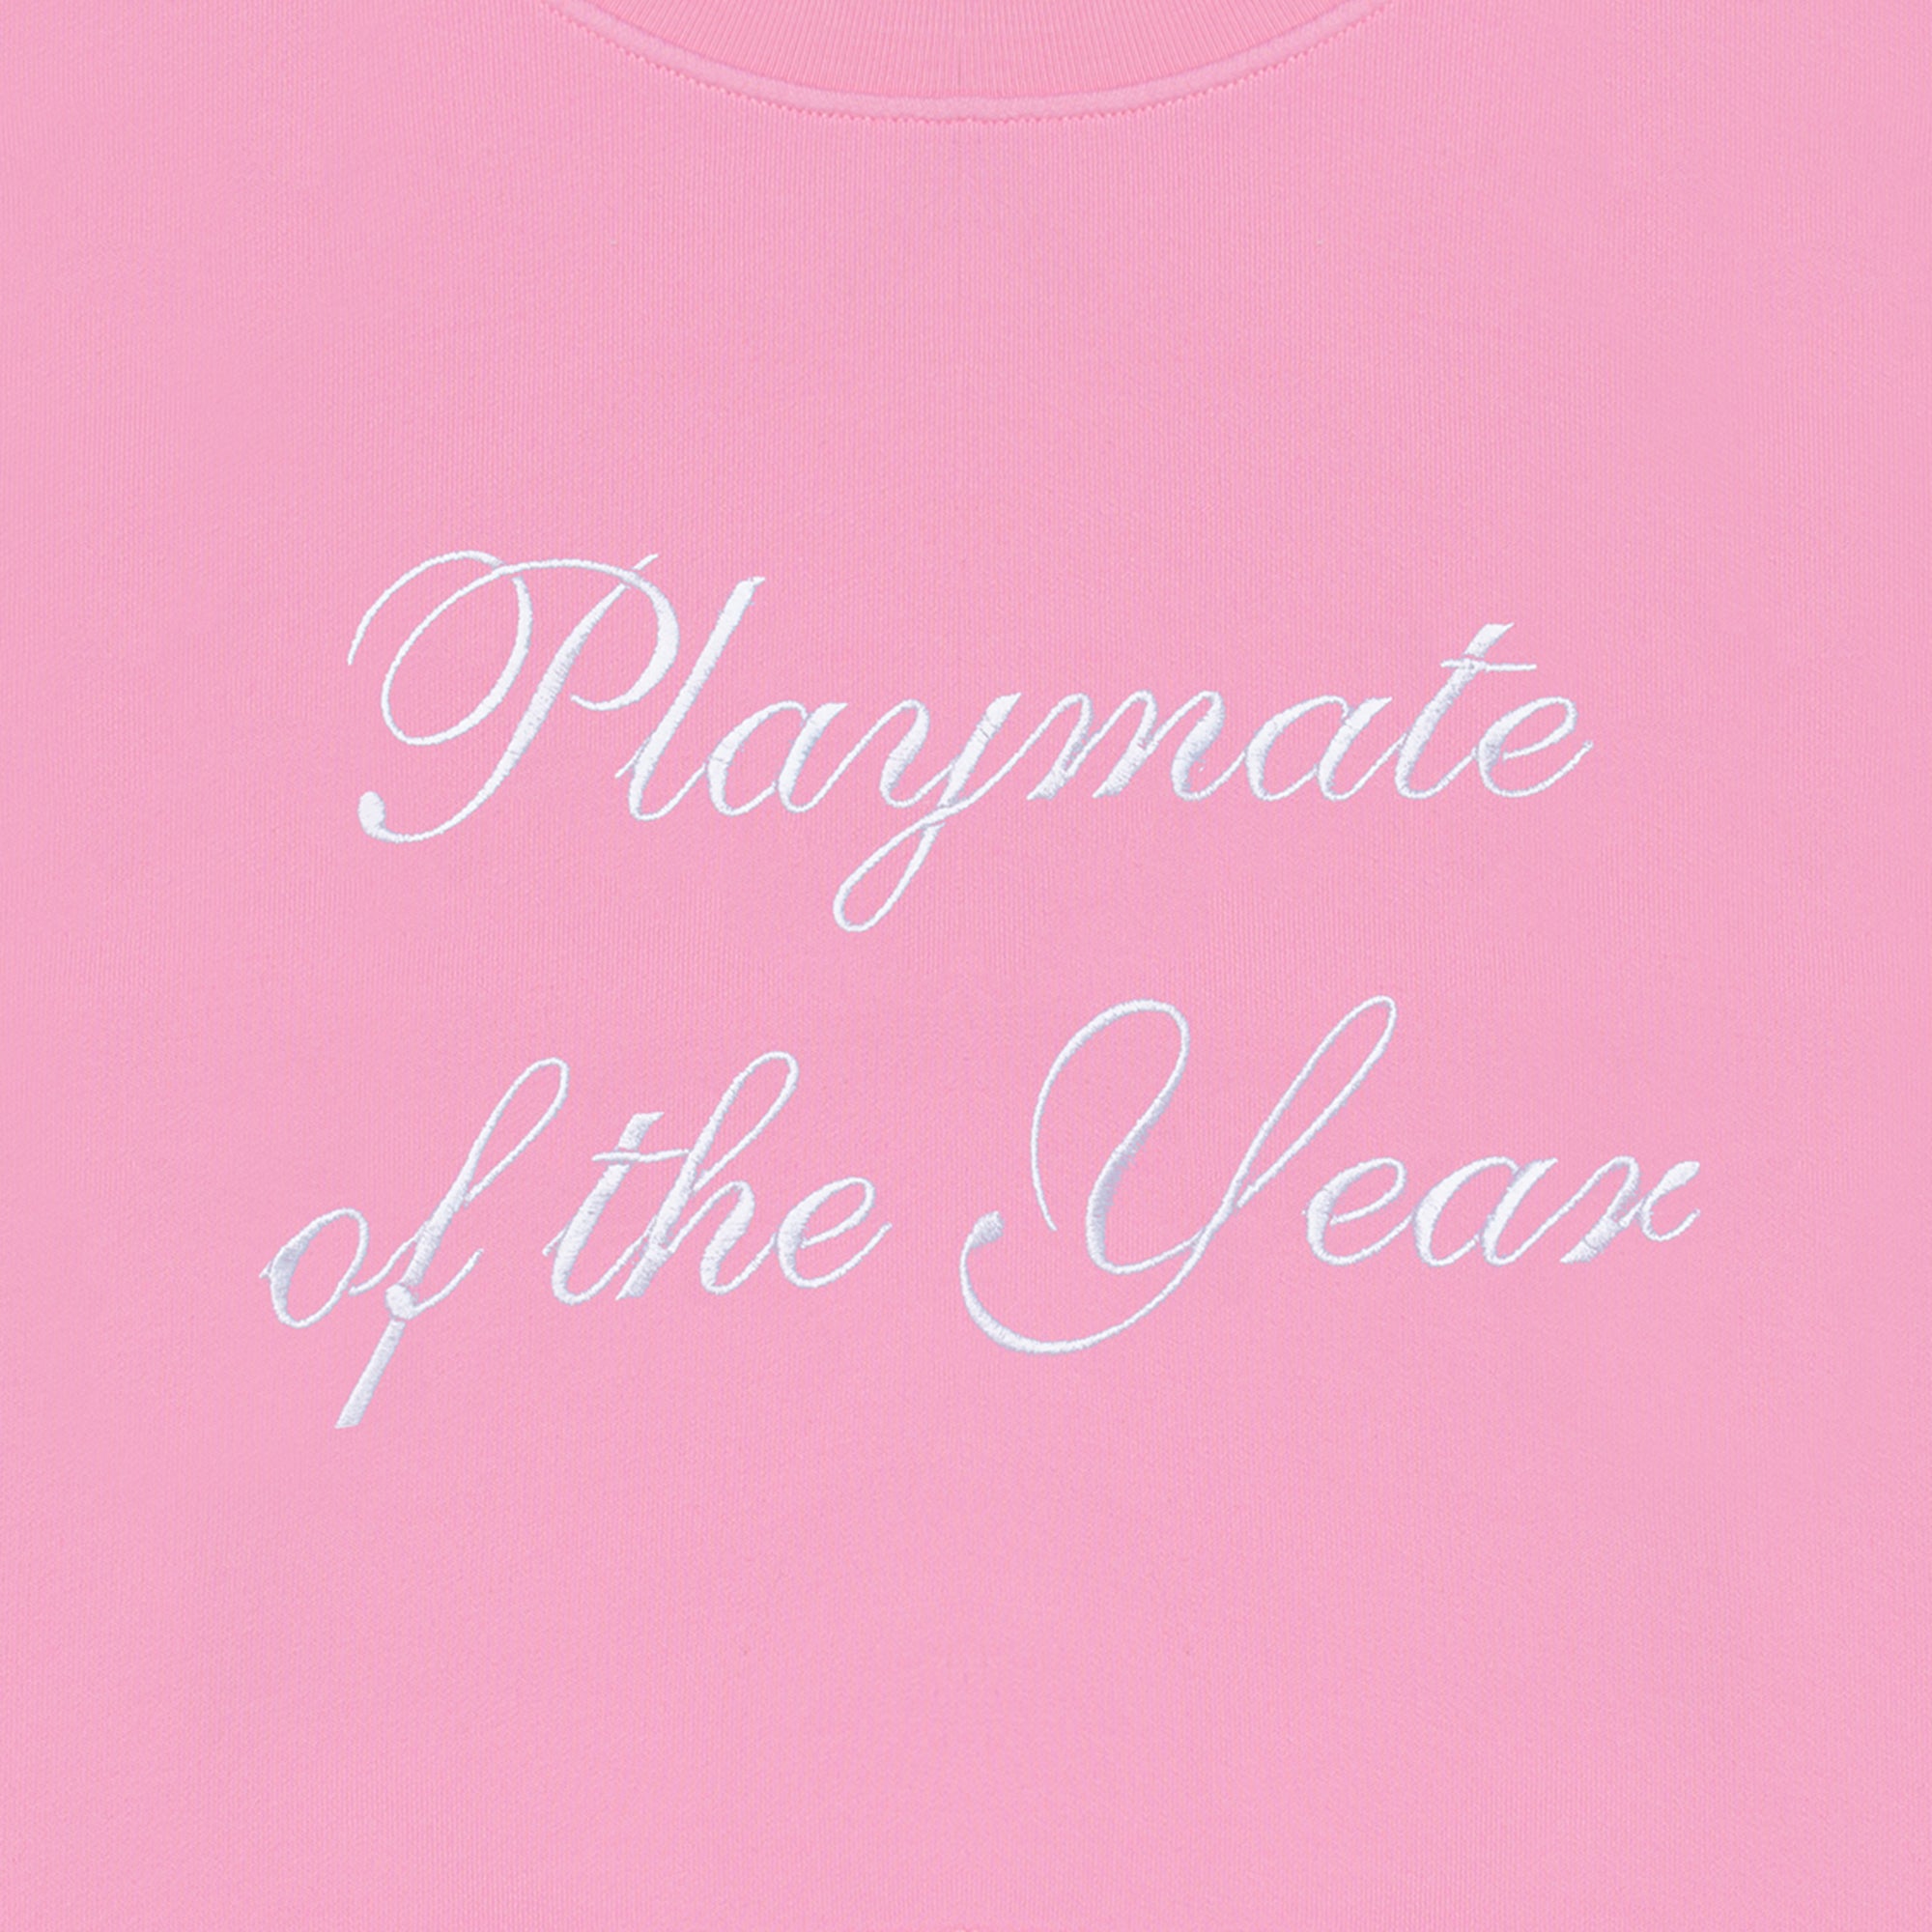 Playmate of the Year Cropped Crewneck - Pink / White Print